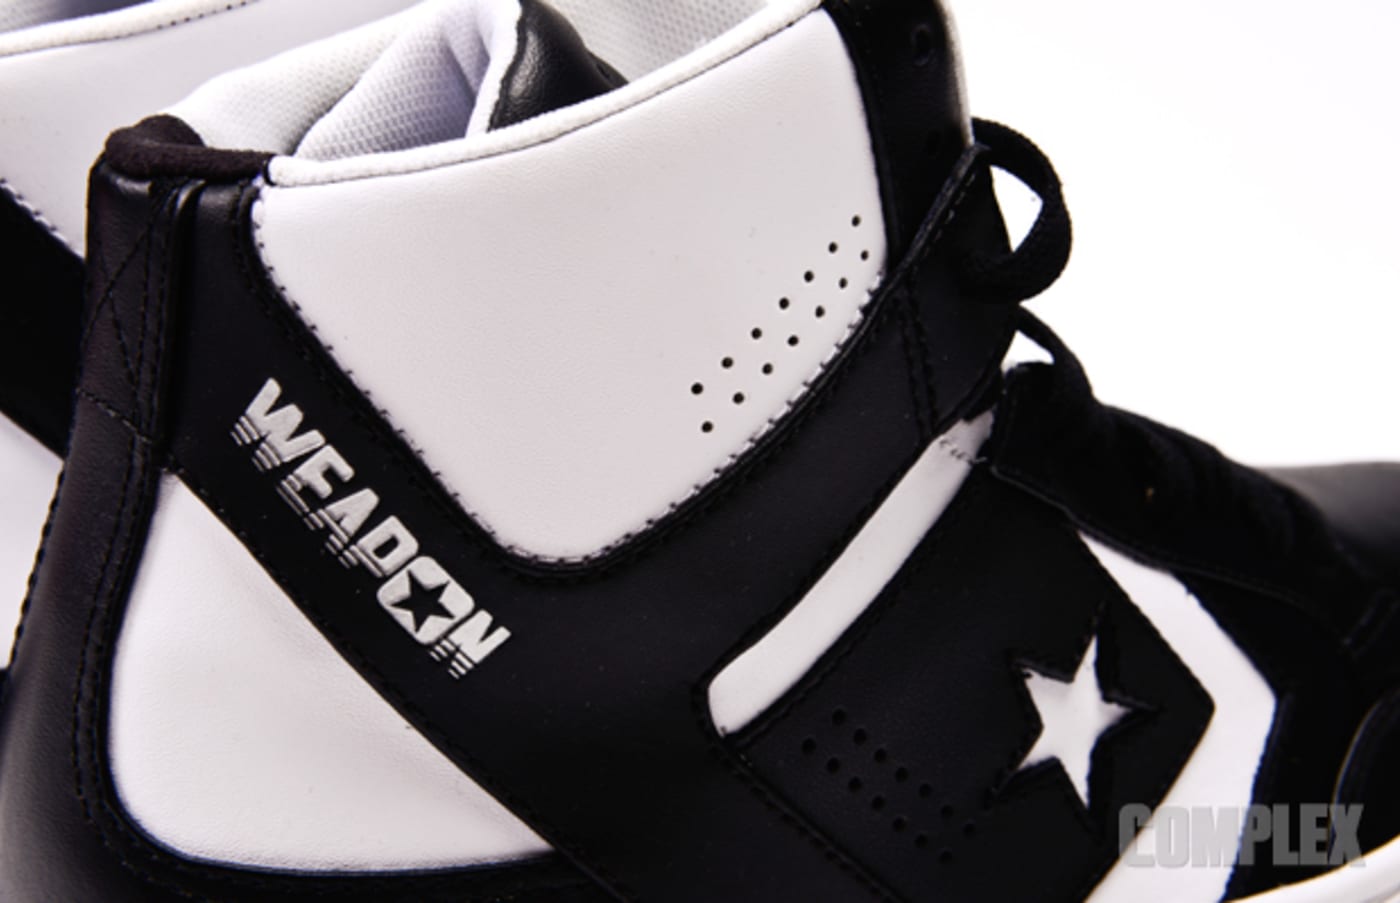 Everything You Need to Know About the New Converse Weapon | Complex